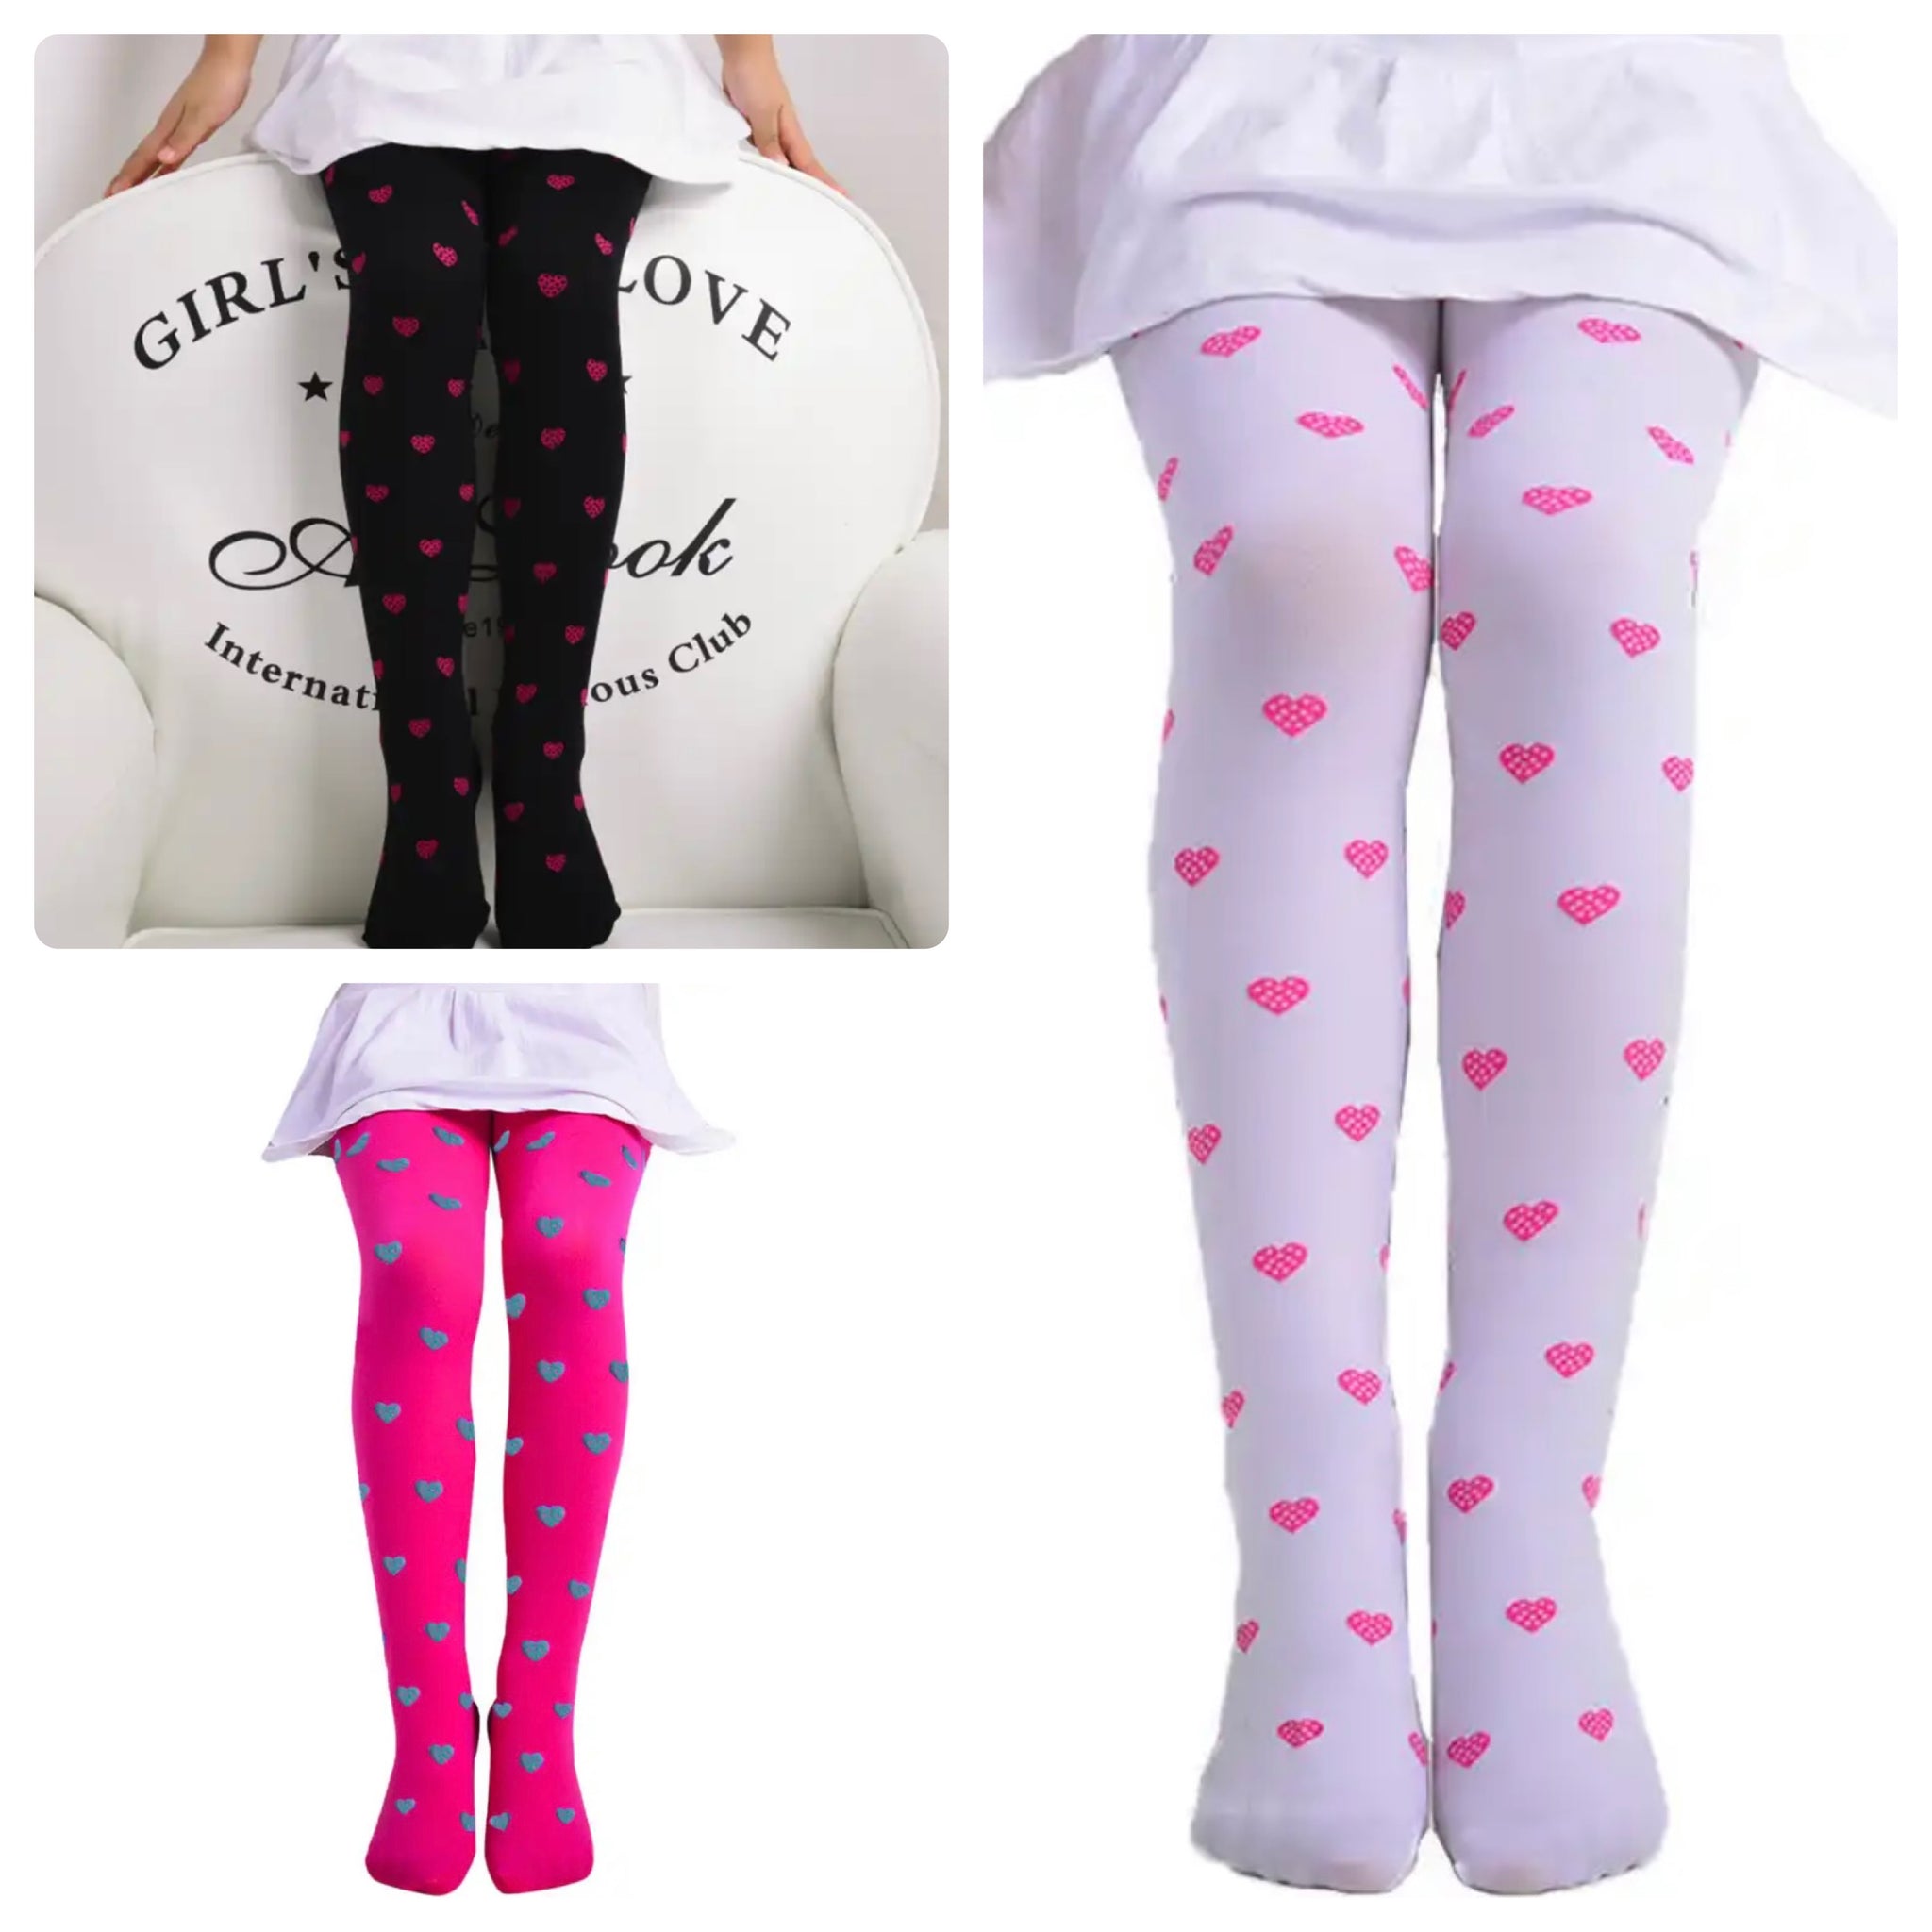 PINK HEART TIGHTS ((Colors)) 3-10 – Bug's Way Clothing